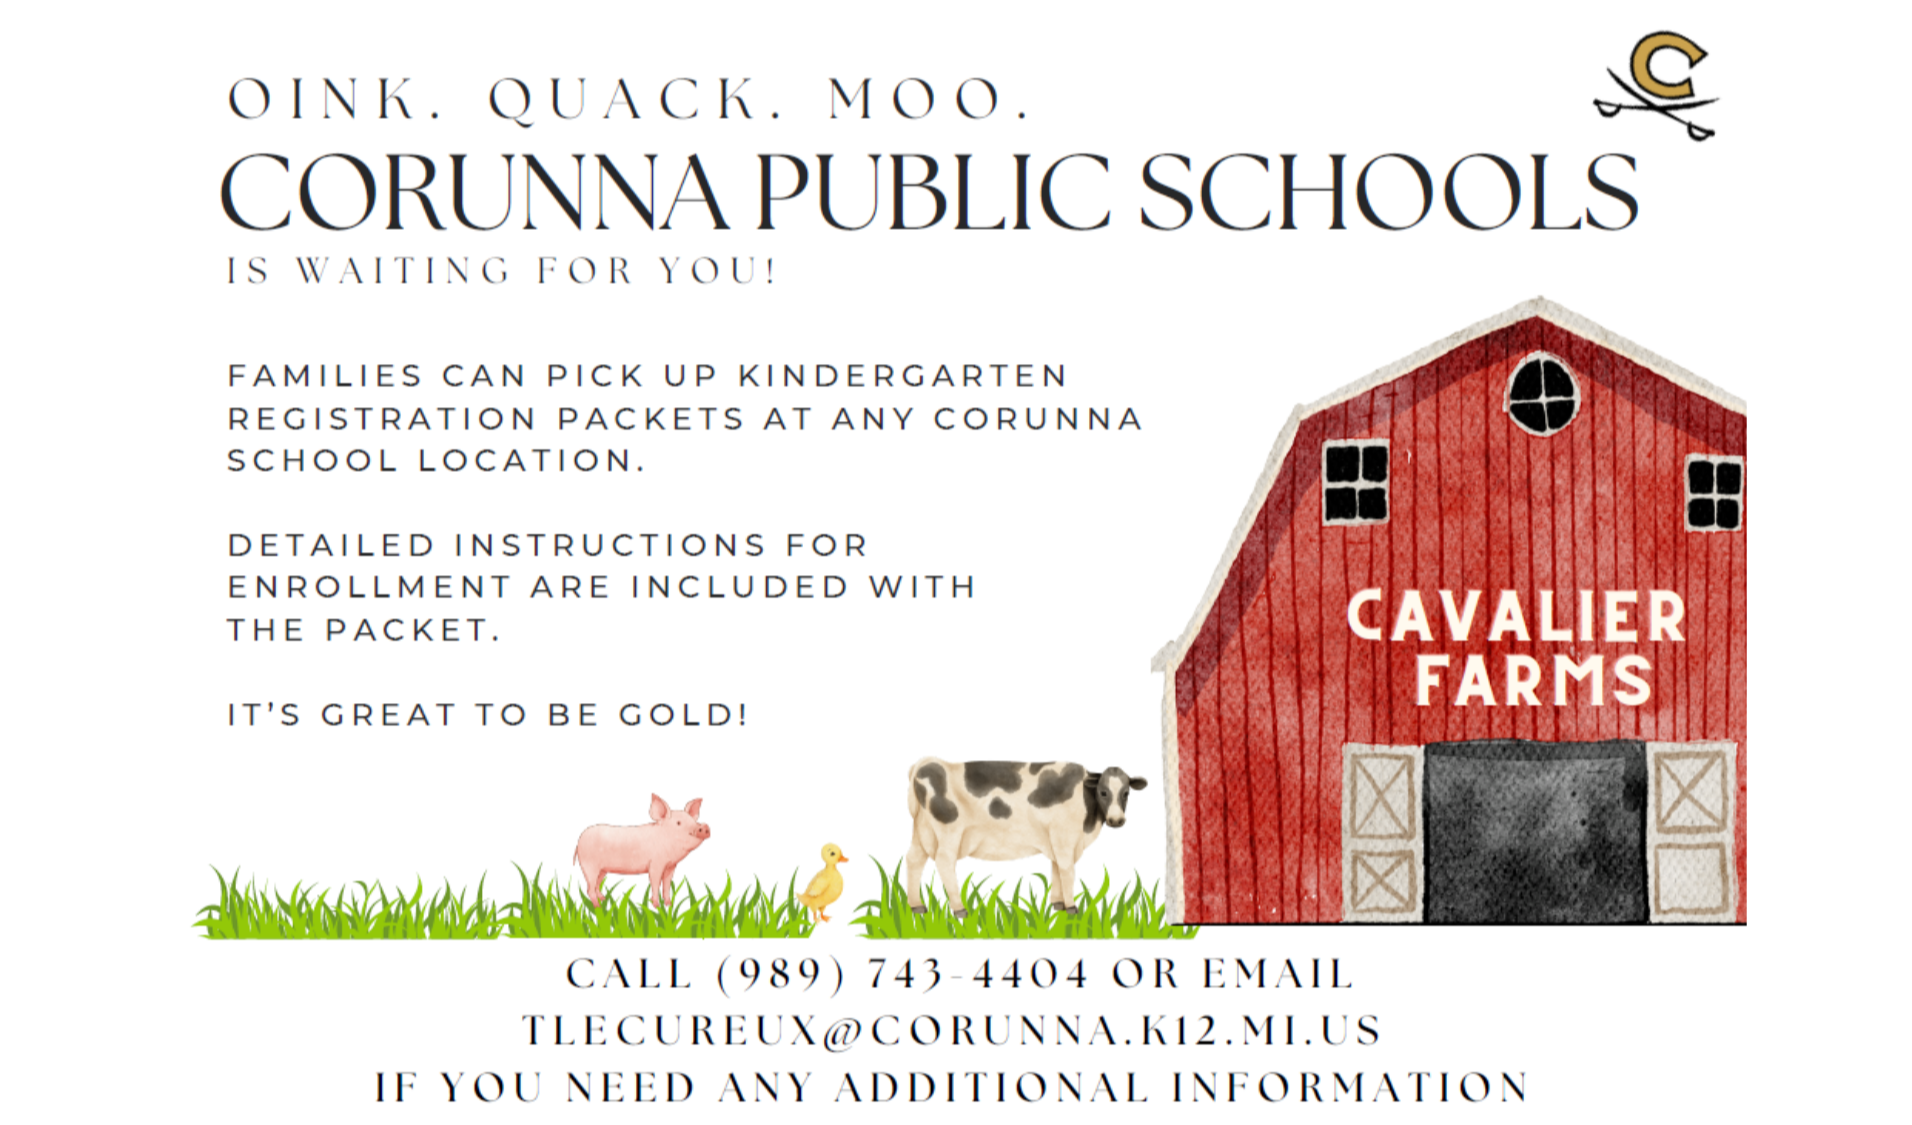 Kindergarten Registration is Open! Flyer is farm themed. Visit a Corunna School for information on how to sign up